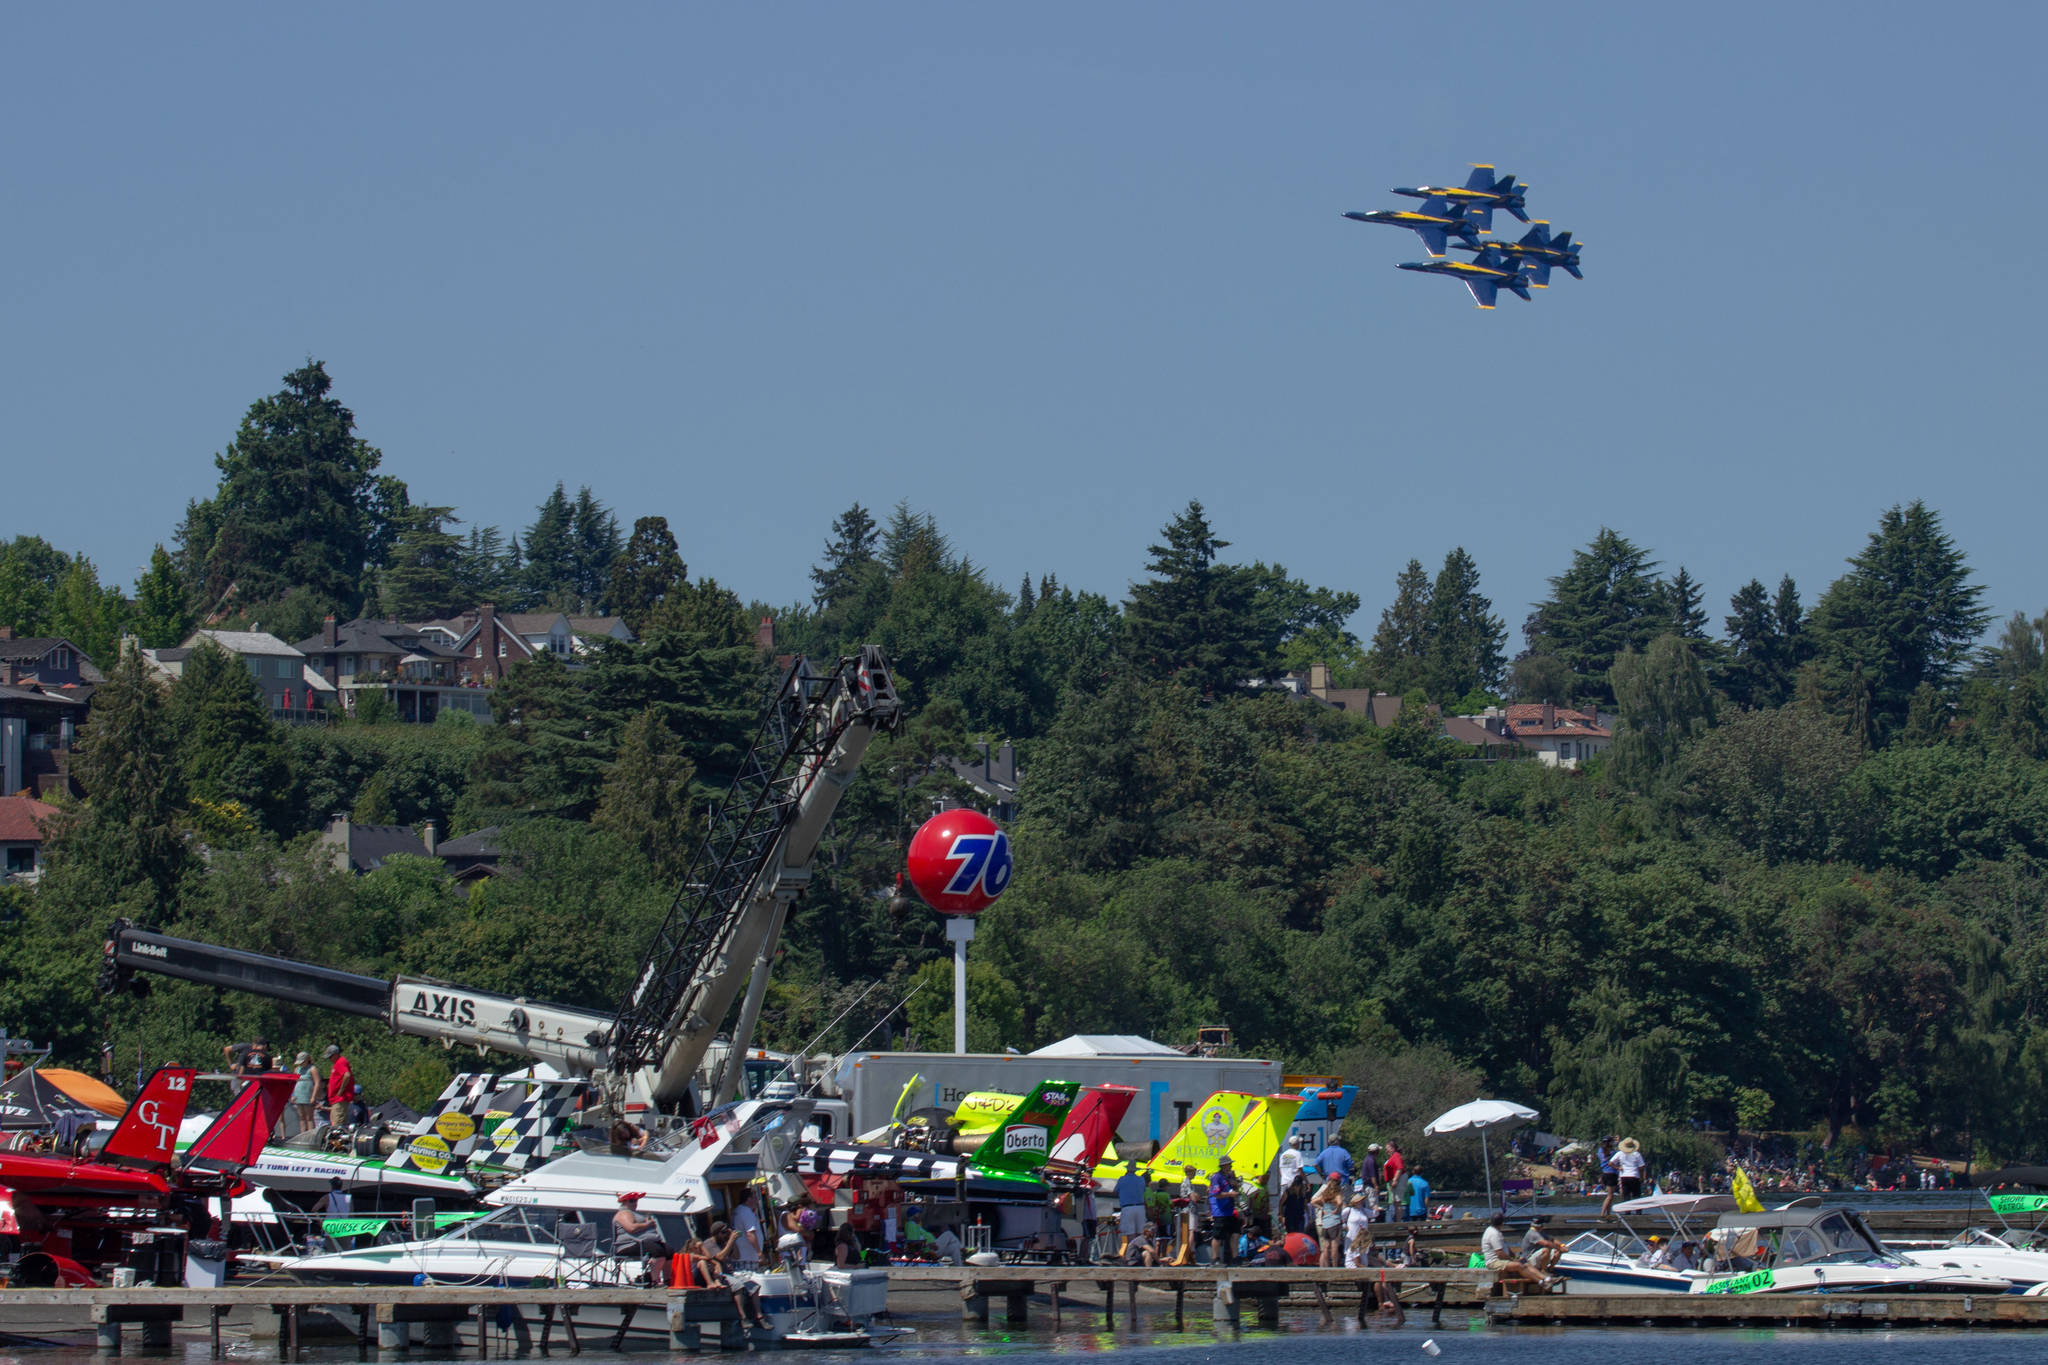 I-90 bridge to remain open during Seafair weekend.